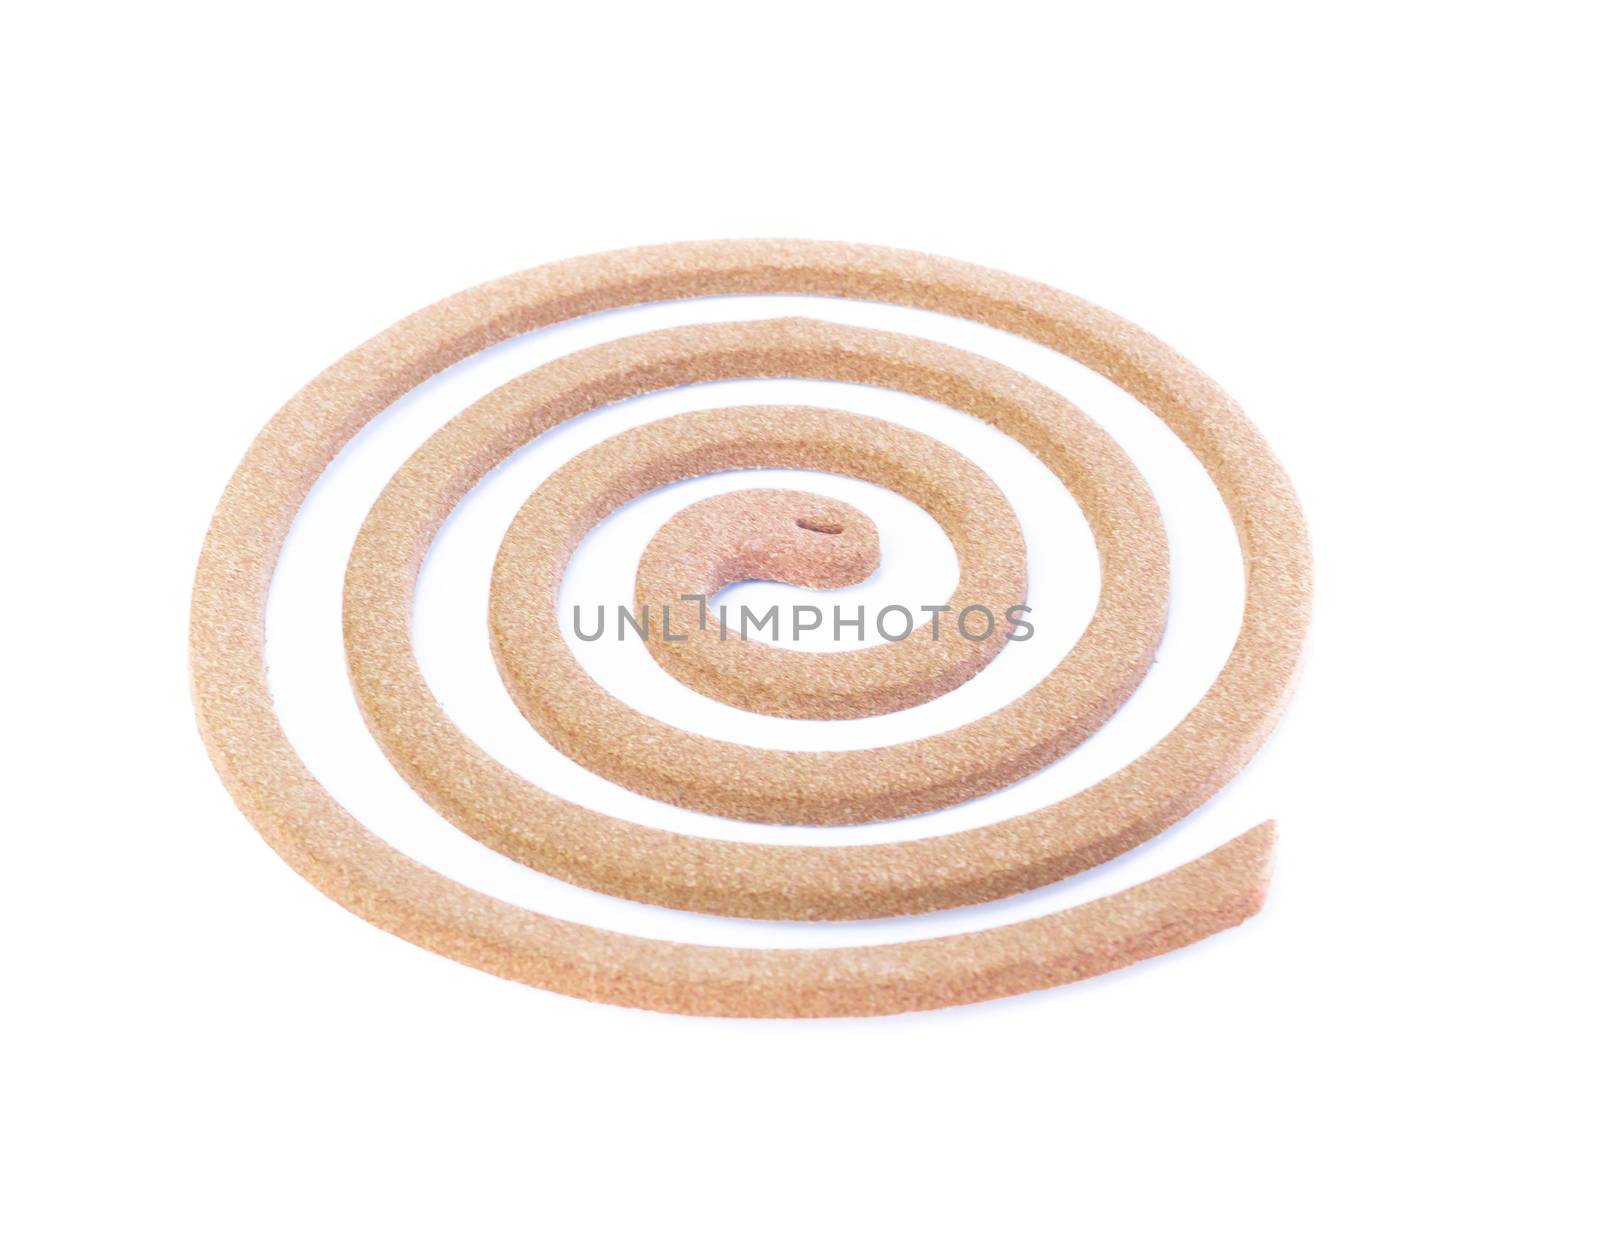 Mosquito coil with lemongrass isolated on white background by pt.pongsak@gmail.com